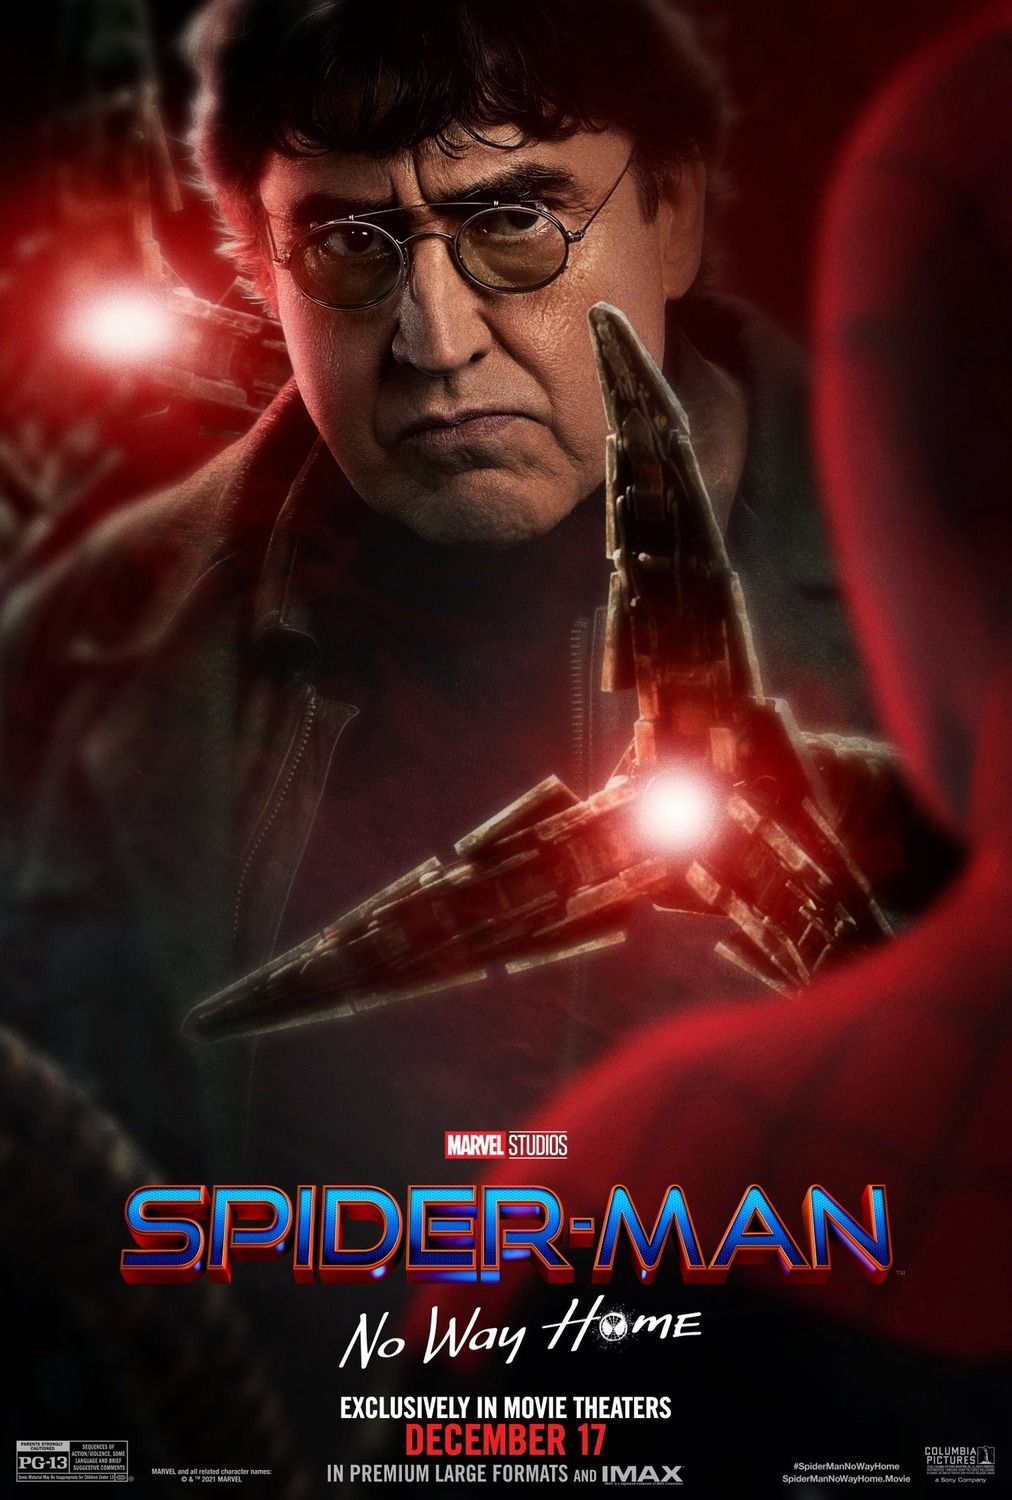 SpiderMan No Way Home Character Posters Unleash a SpiderVerse of